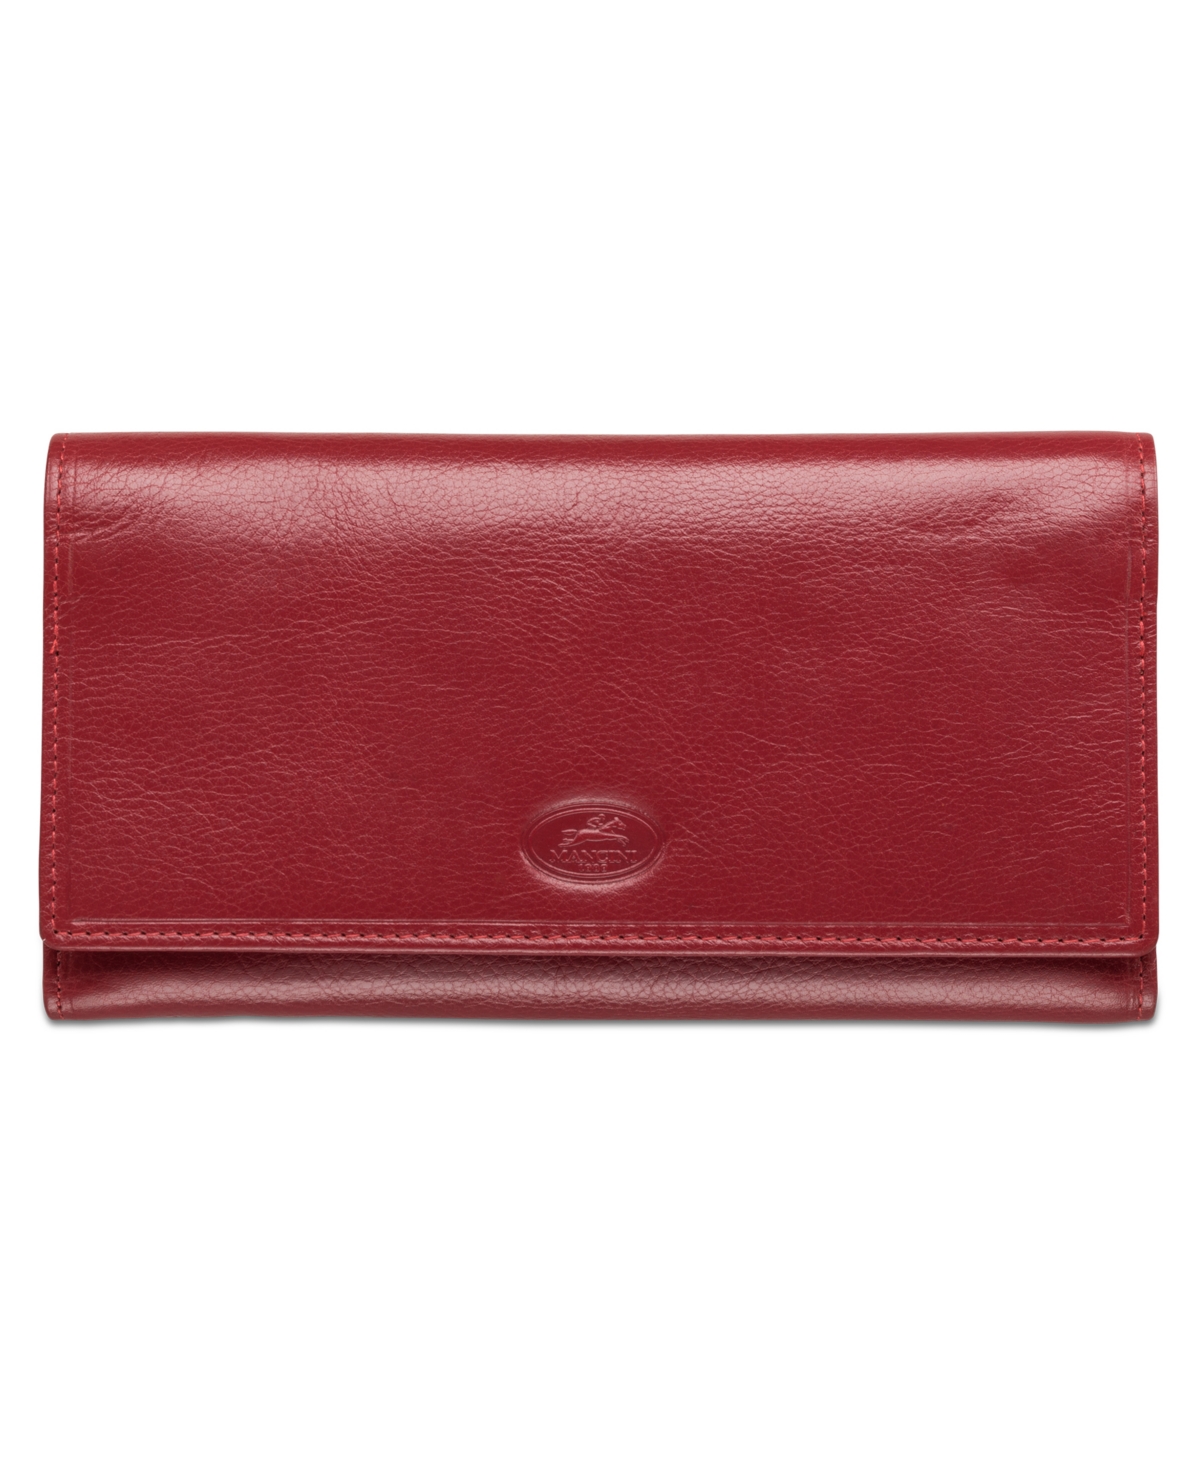 Equestrian-2 Collection Rfid Secure Trifold Checkbook Wallet - Red